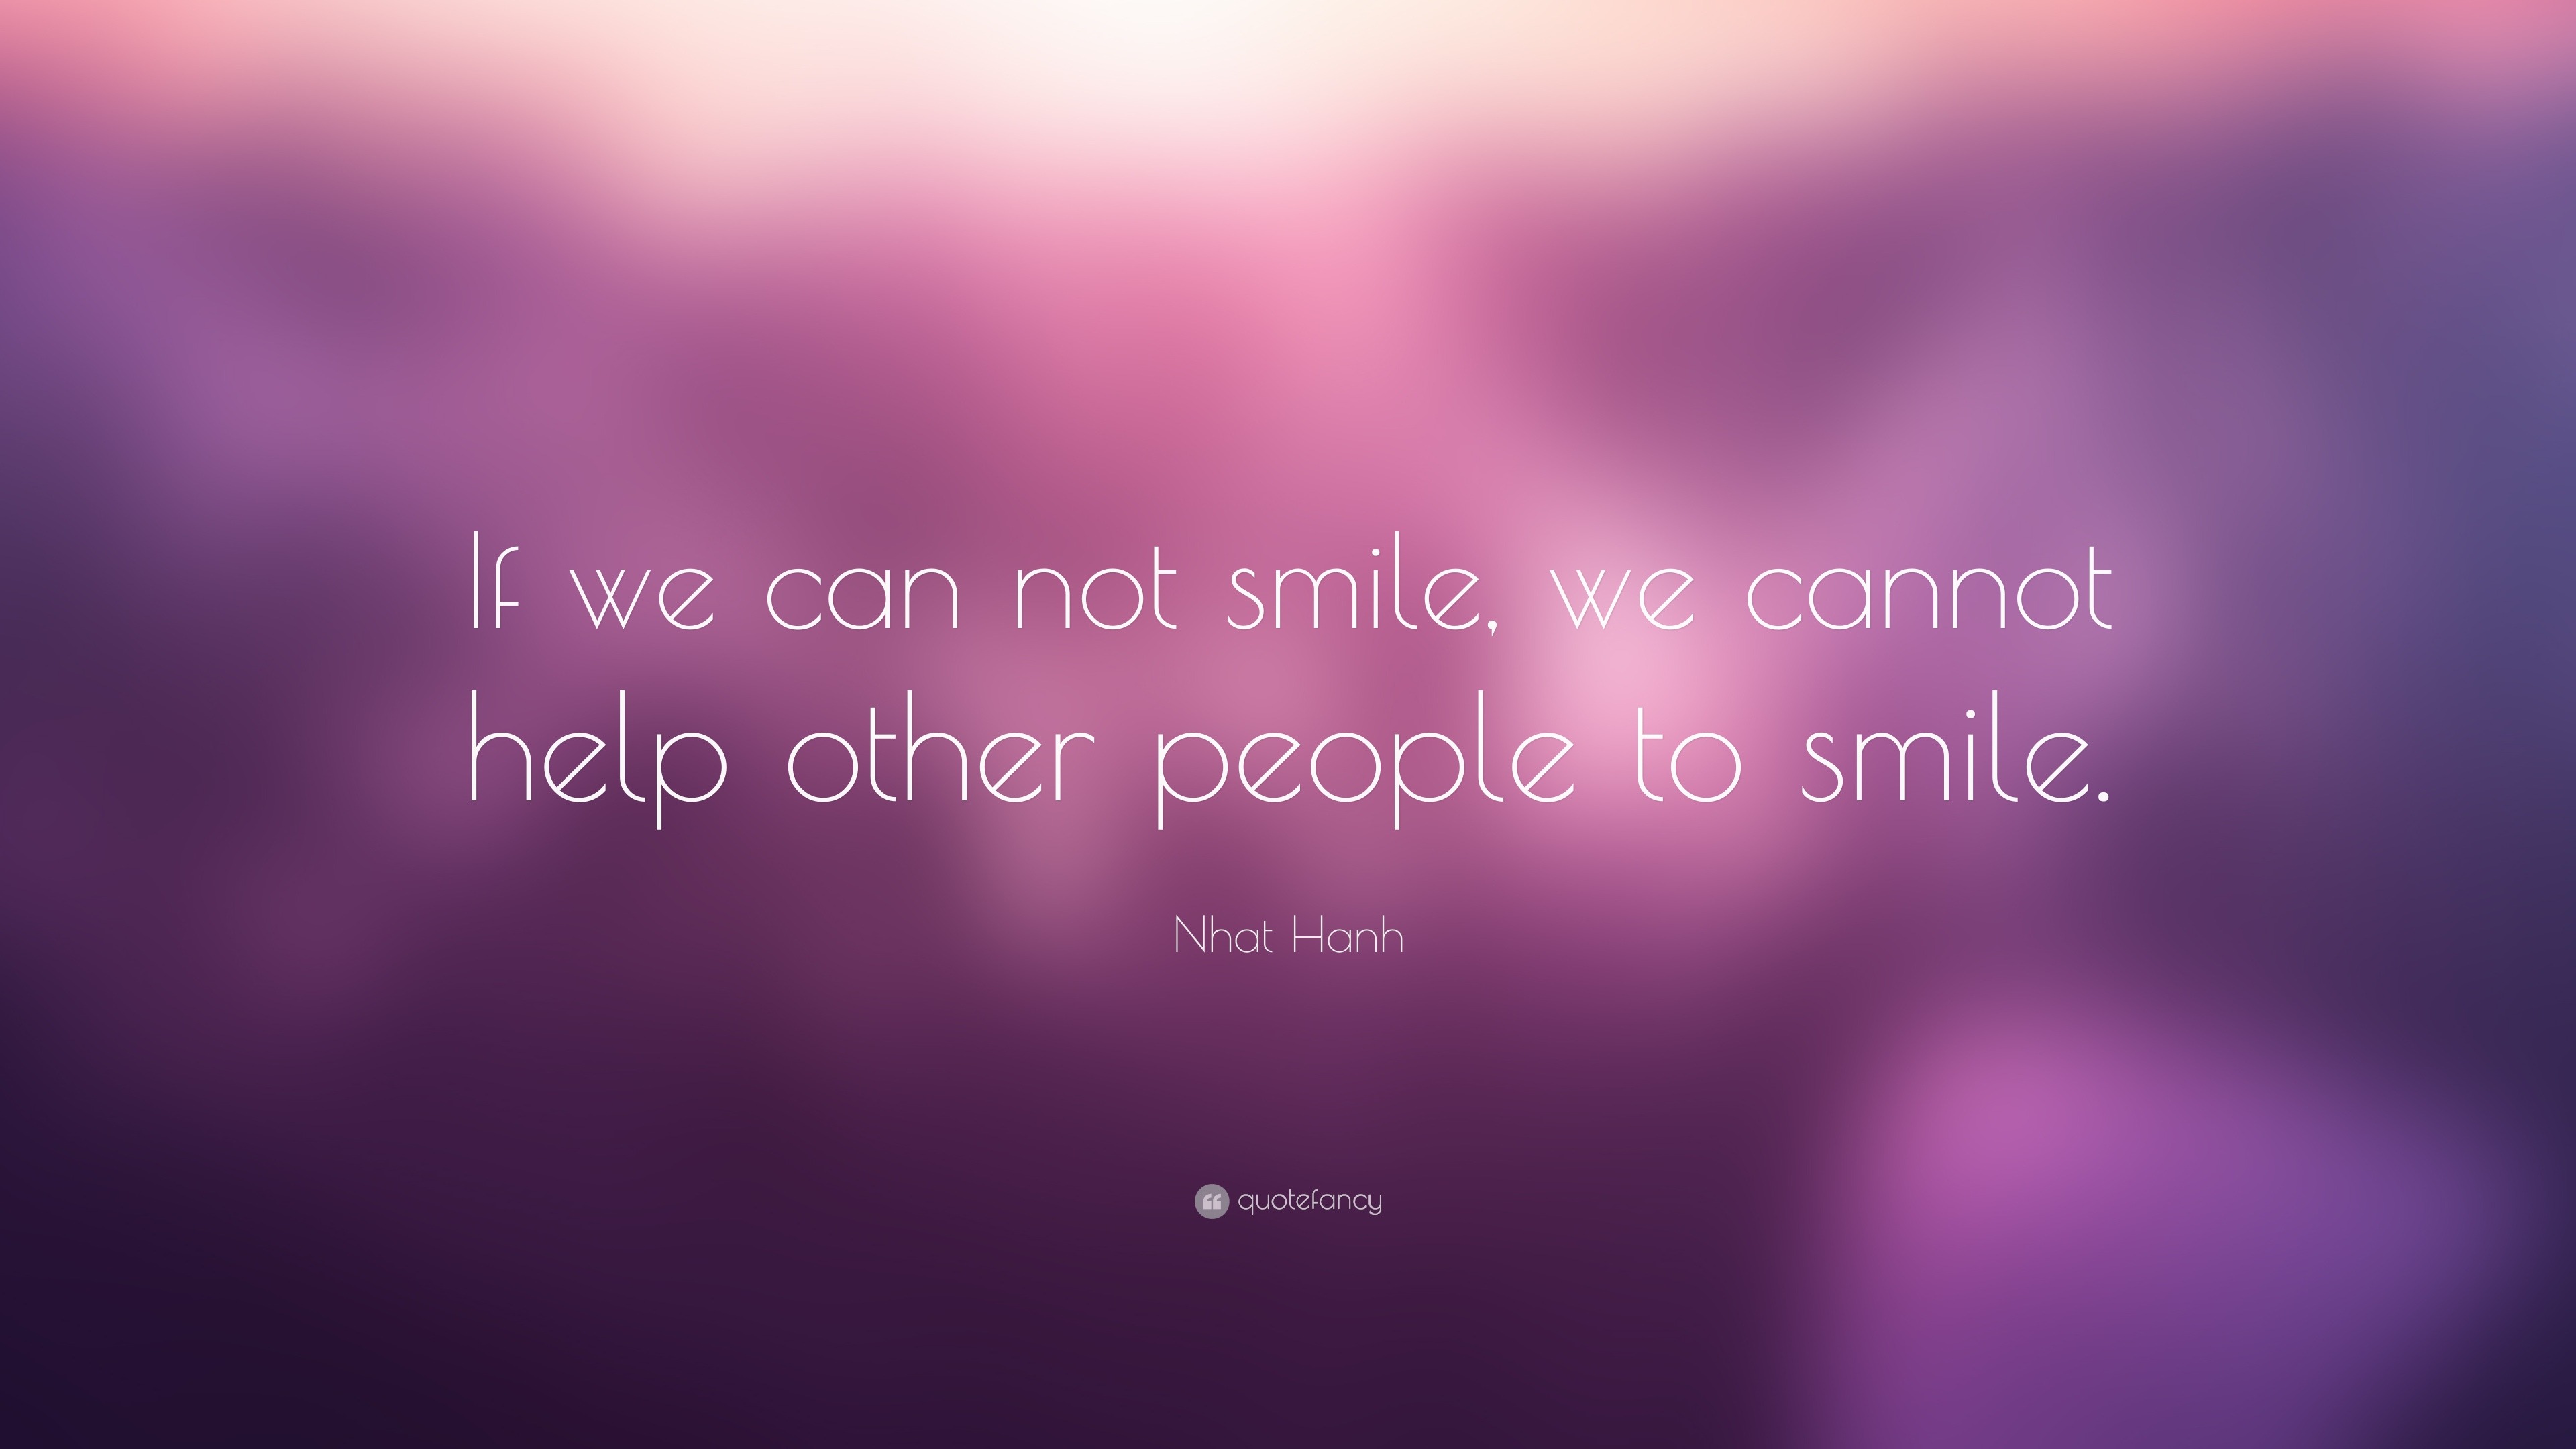 Nhat Hanh Quote: “If we can not smile, we cannot help other people to ...